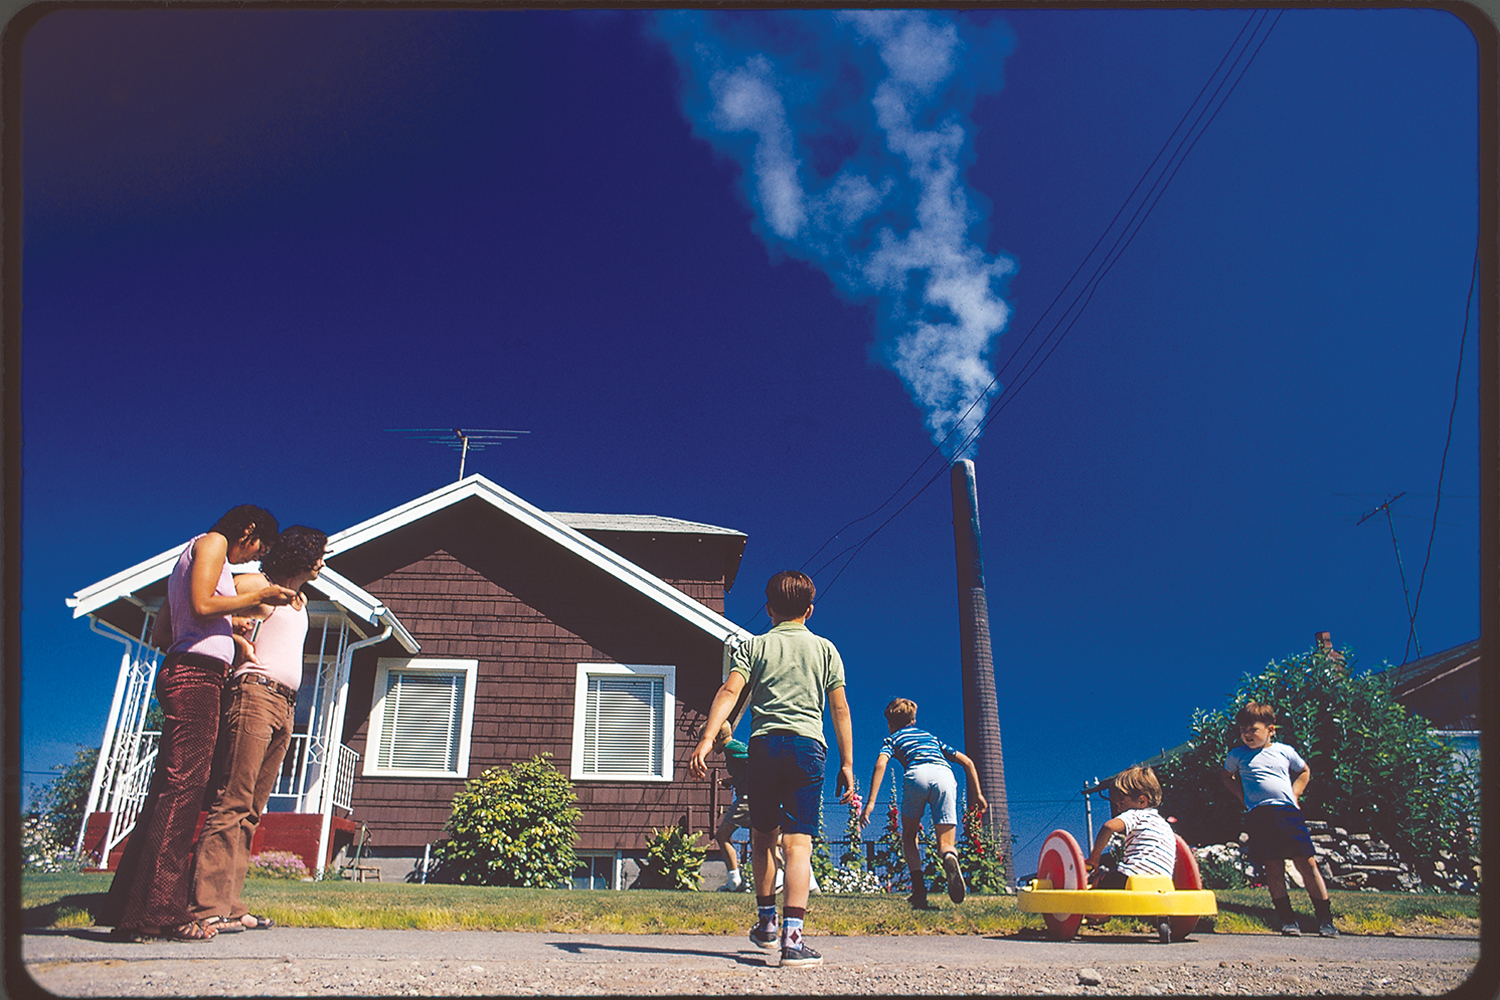 Children play in yard of Ruston home, while Tacoma smelter stack showers area with arsenic and lead residue. Washington State, 1972.